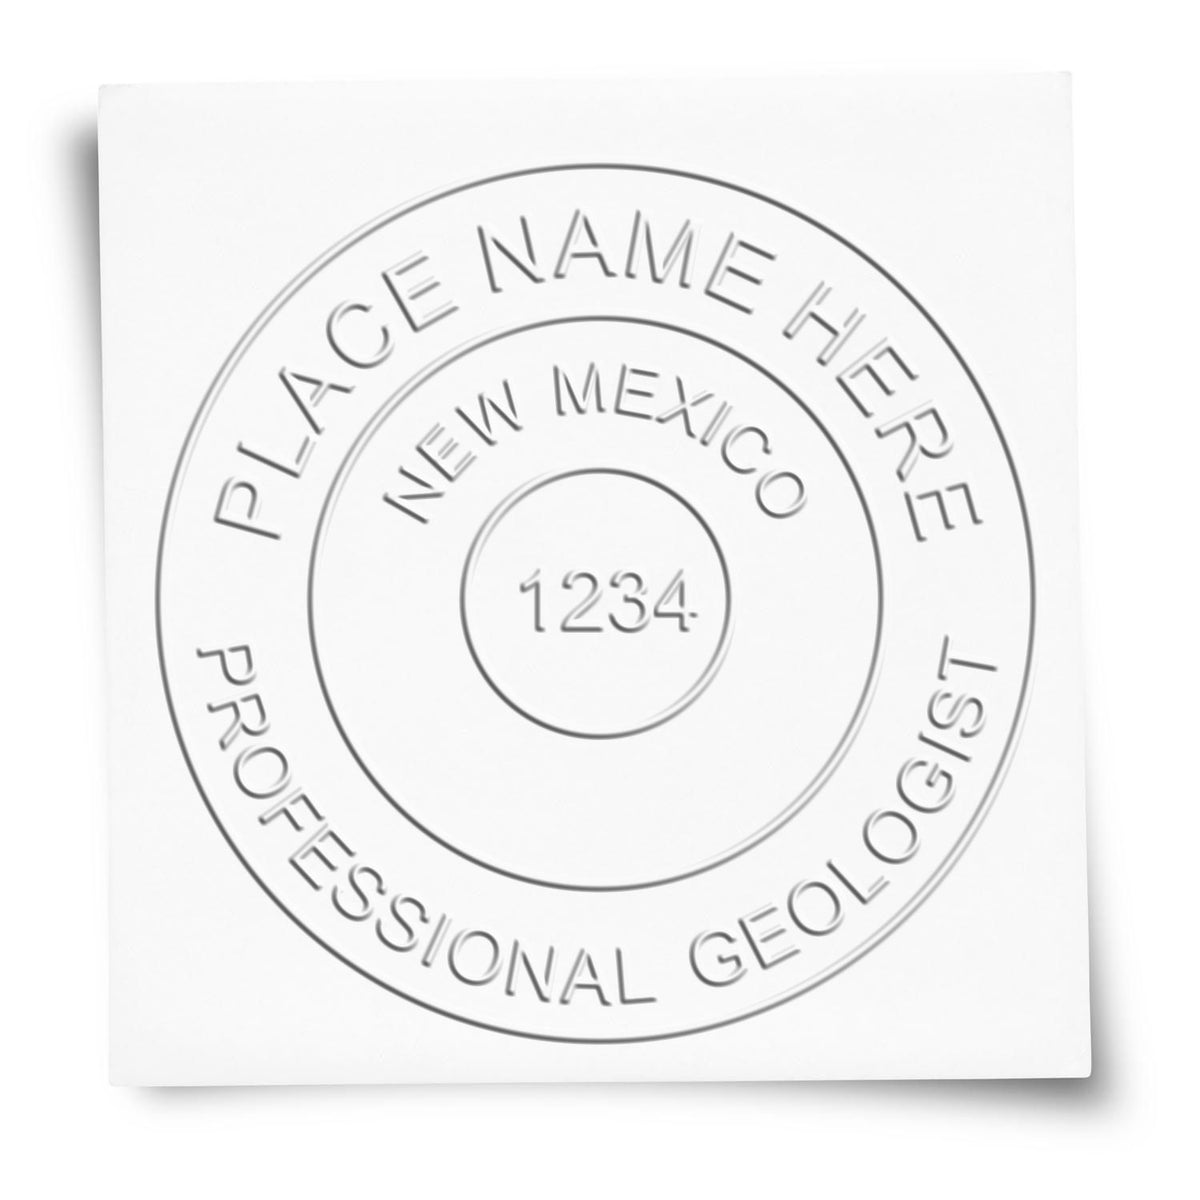 An alternative view of the State of New Mexico Extended Long Reach Geologist Seal stamped on a sheet of paper showing the image in use